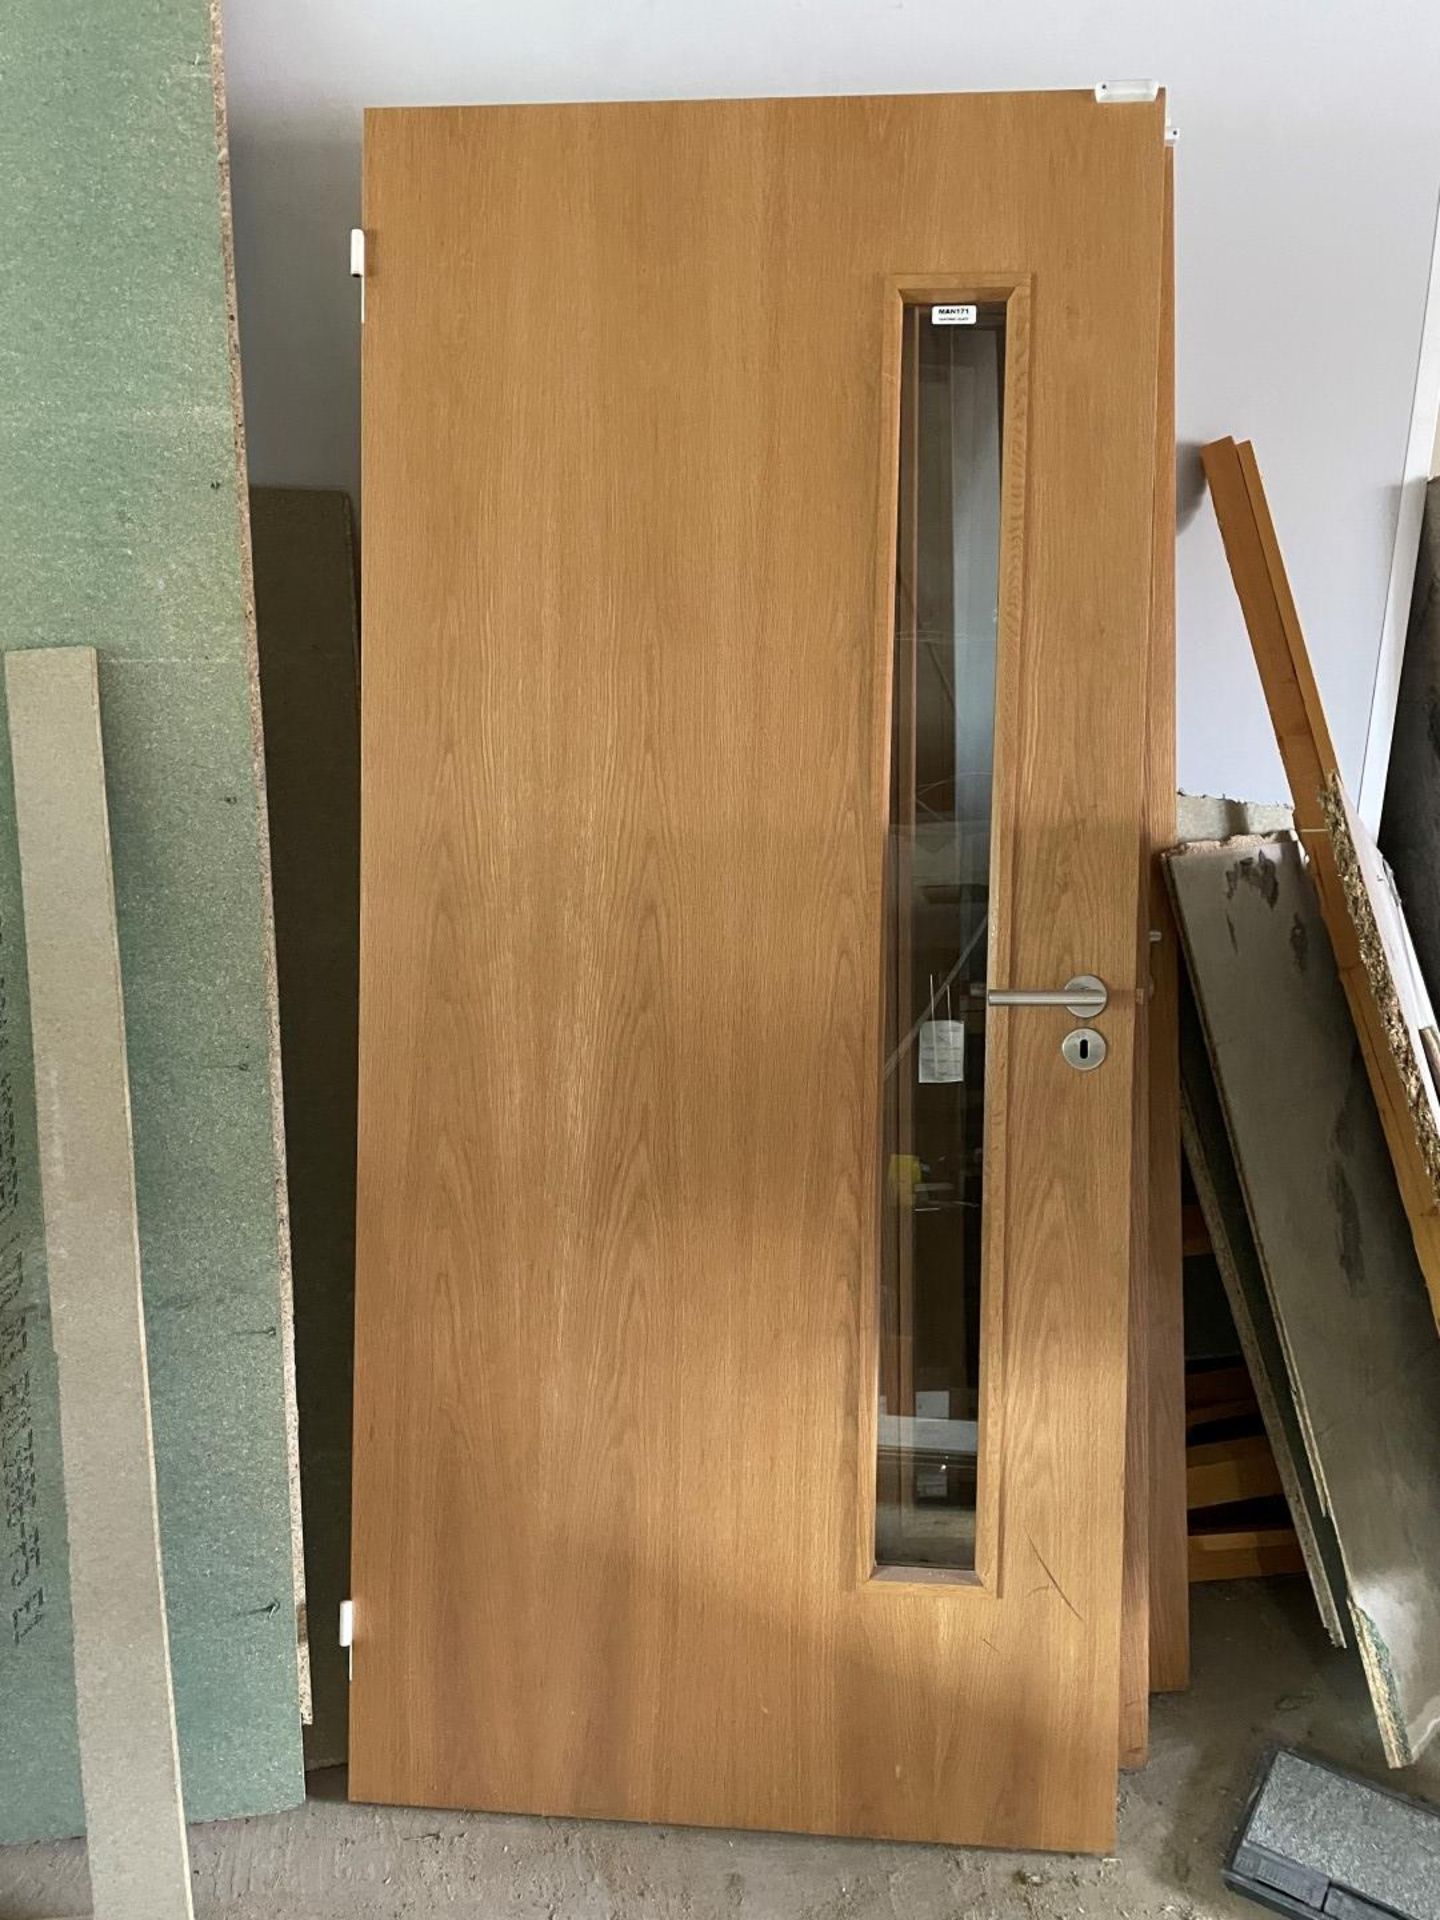 4 x Office Fire Doors With Glass Window And Stainless Steel Lock - Dimensions: H204 x W93 x D4.2cm